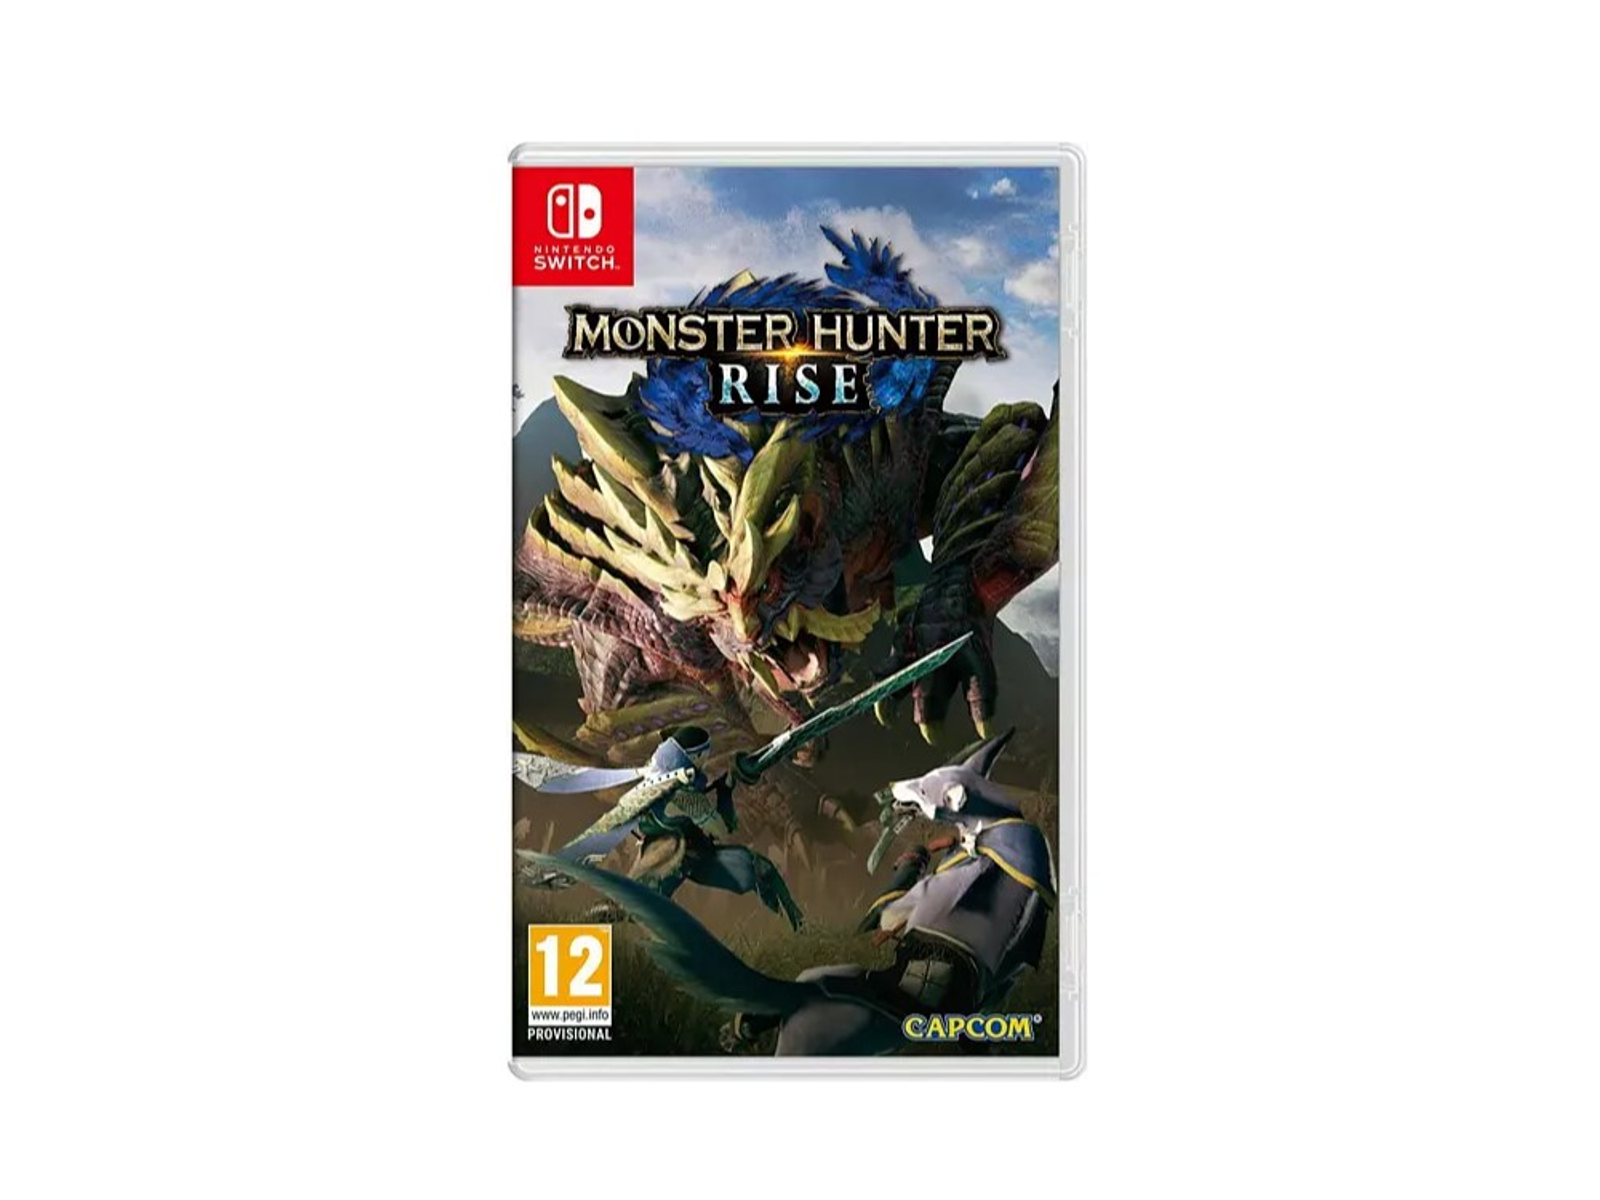 RISE SW HUNTER [Nintendo - MONSTER Switch] (COLLECTOR EDIT.) S